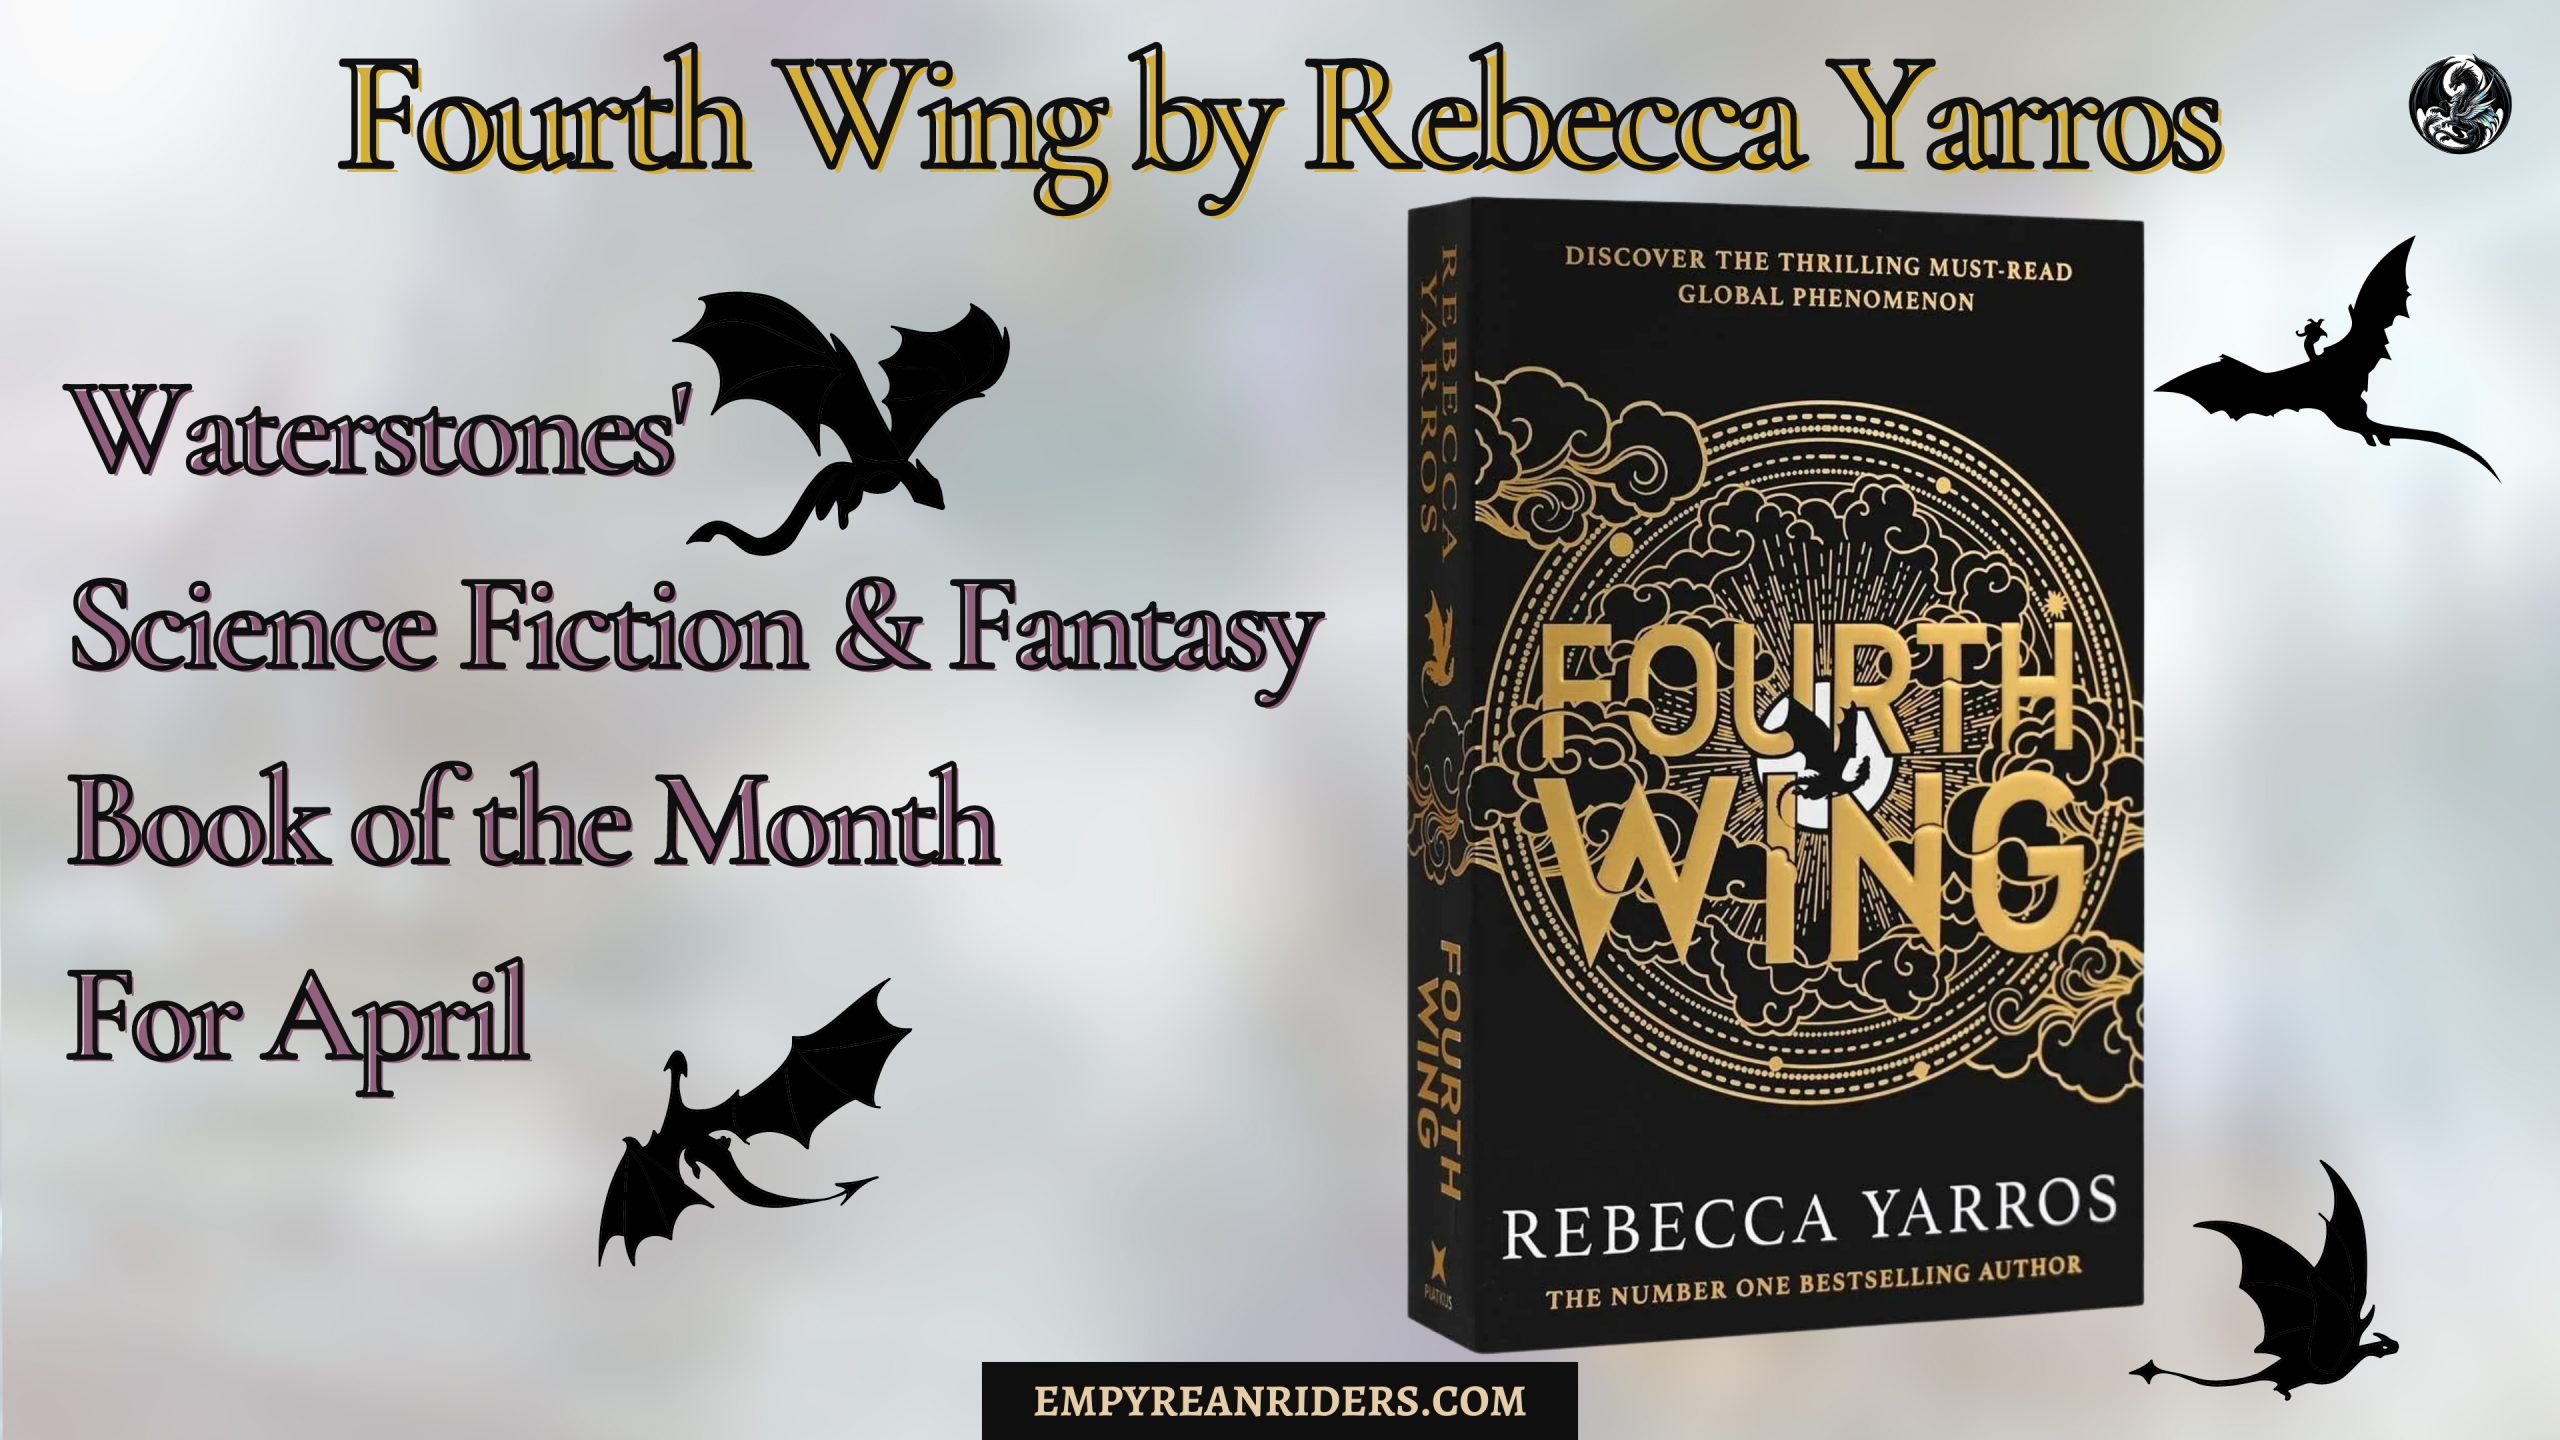 Fourth Wing is Waterstones’ Science Fiction & Fantasy Book of the Month for April